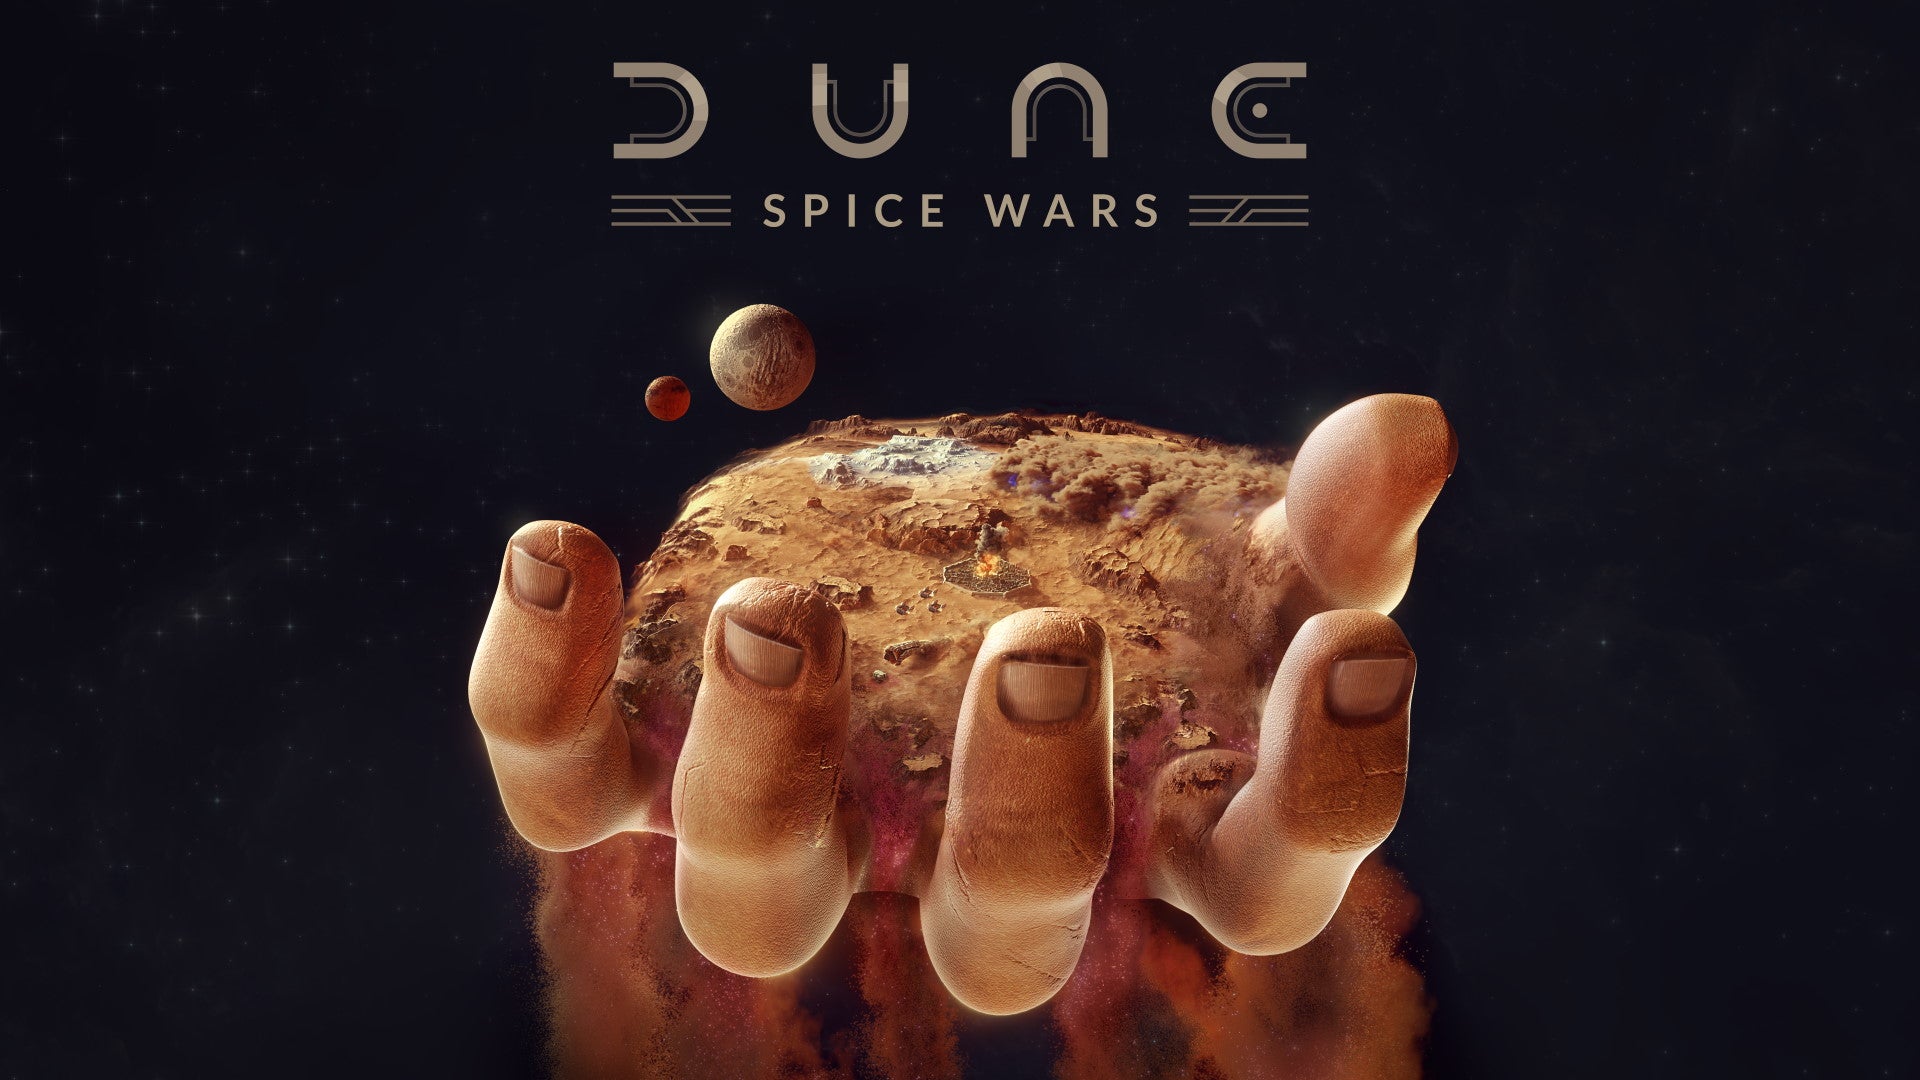 A hand holds the planet of Arrakis in the key artwork for Dune: Spice Wars